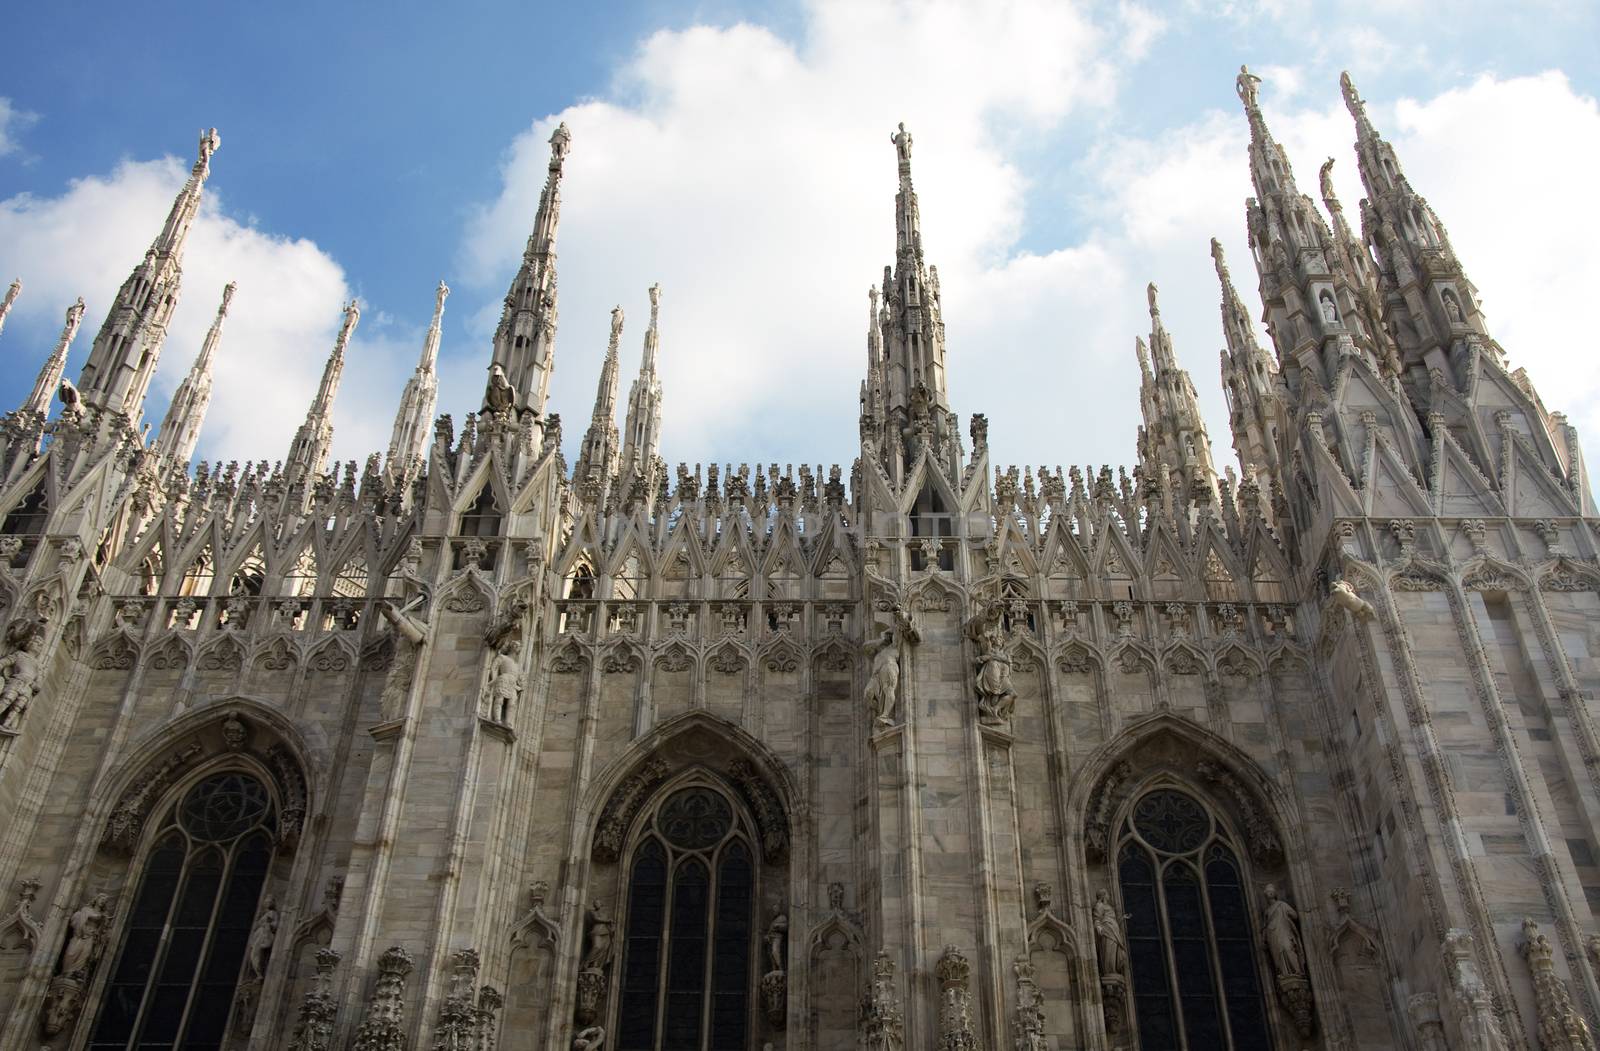 Side view of the cathedral in Milan, Italy by fotoecho